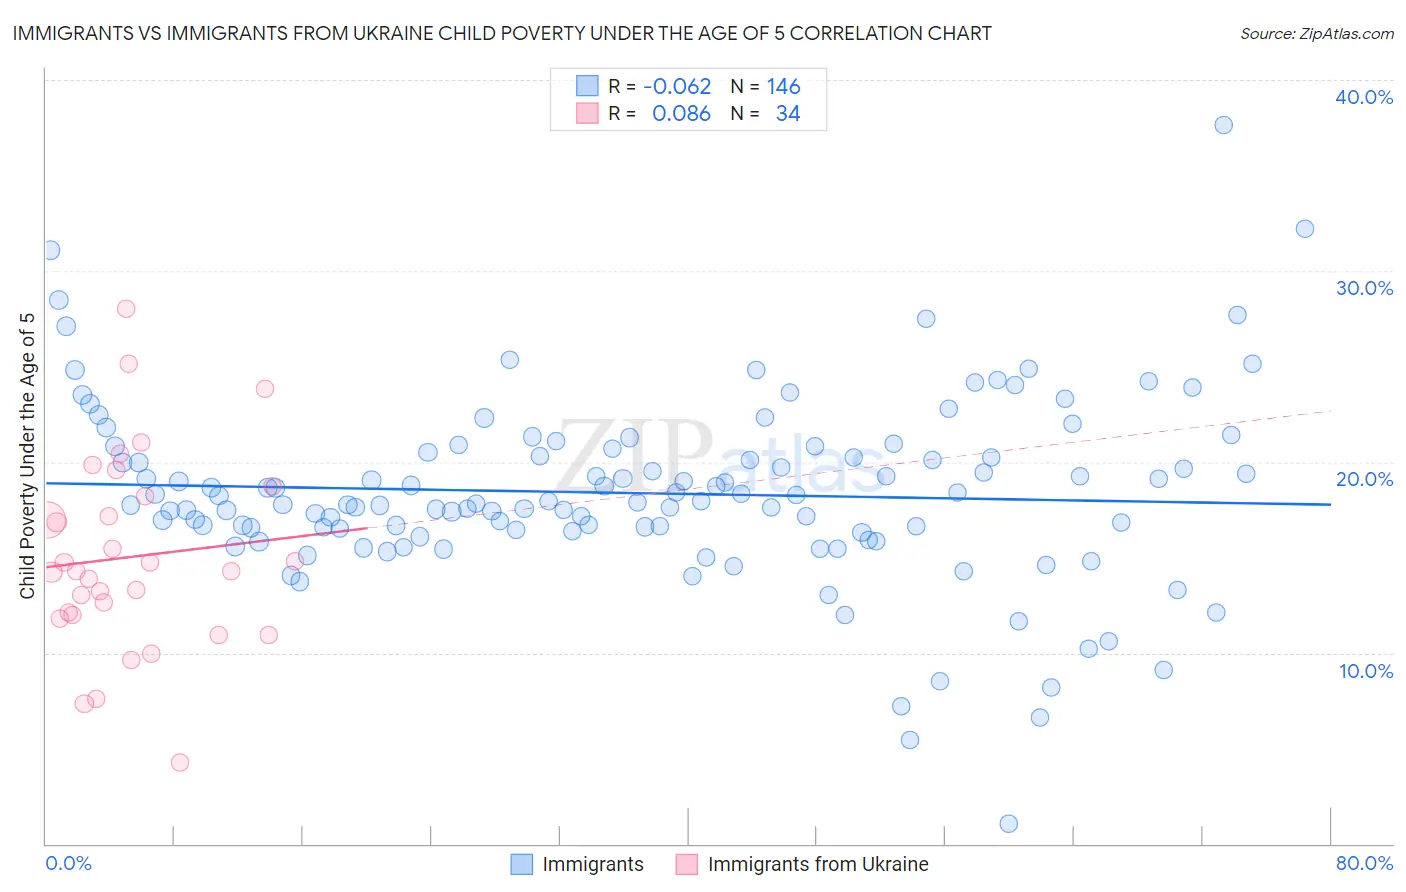 Immigrants vs Immigrants from Ukraine Child Poverty Under the Age of 5